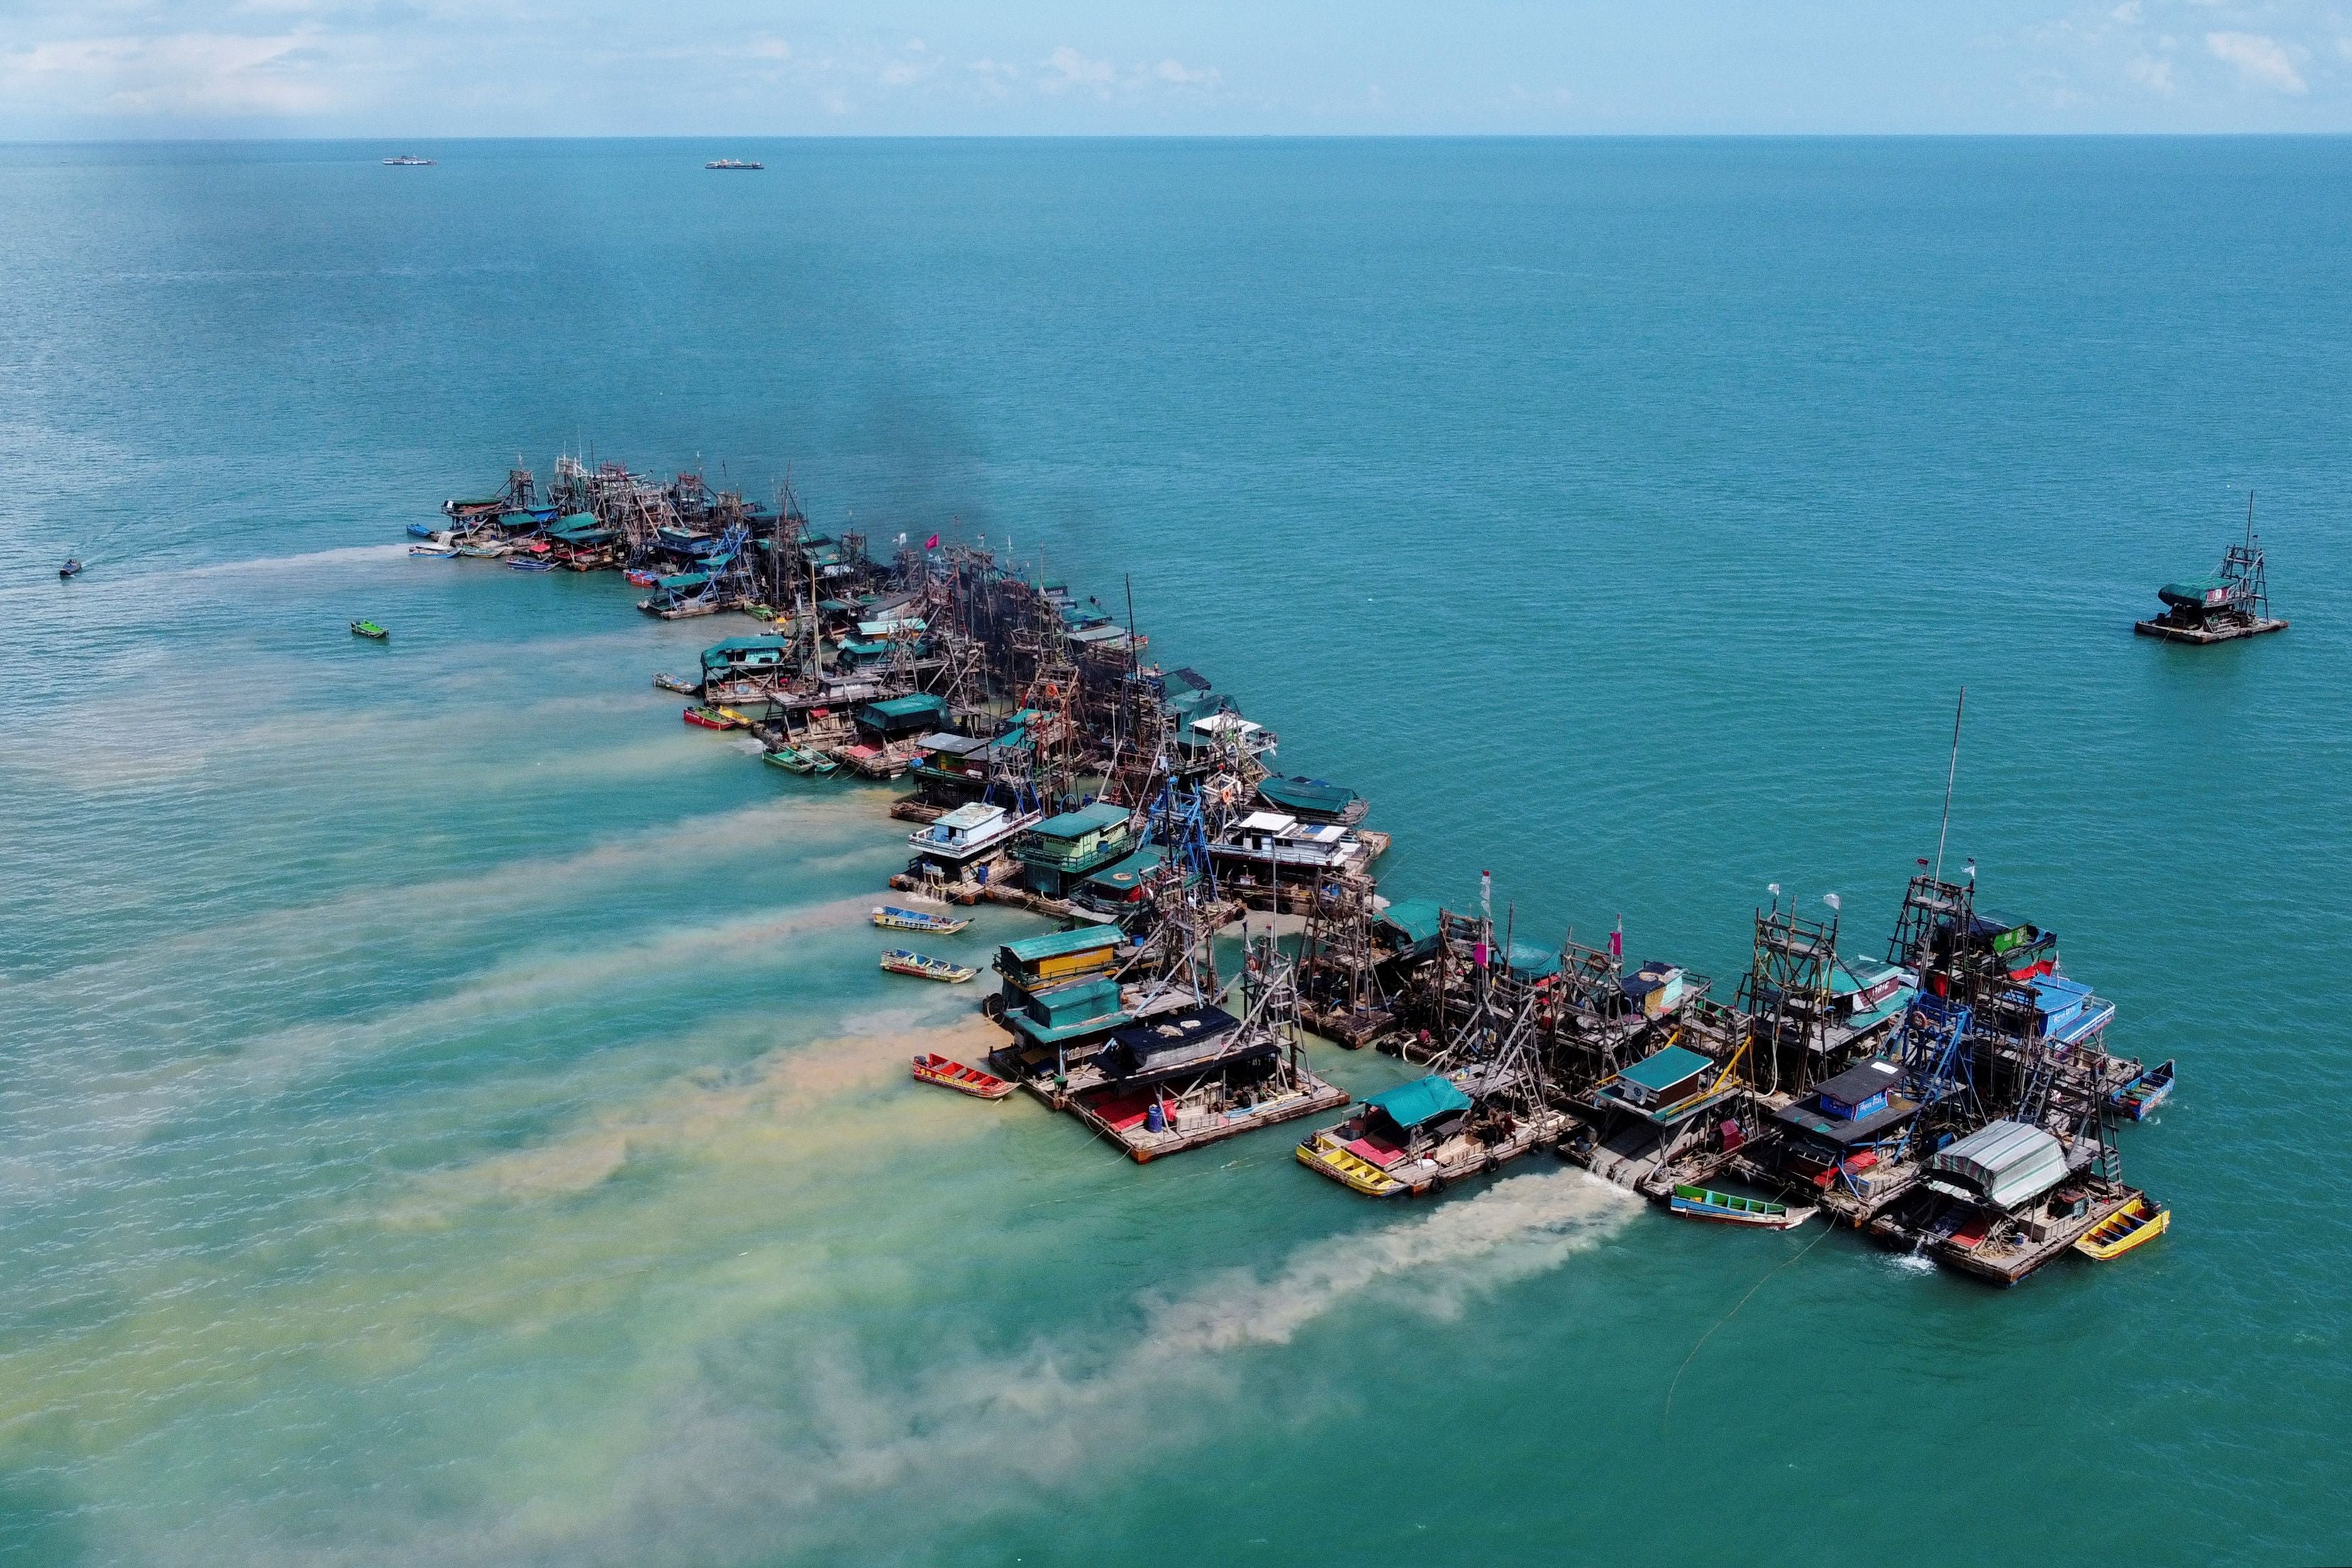 Wooden pontoons equipped to dredge the seabed for deposits of tin ore off the coast of Toboali, Indonesia